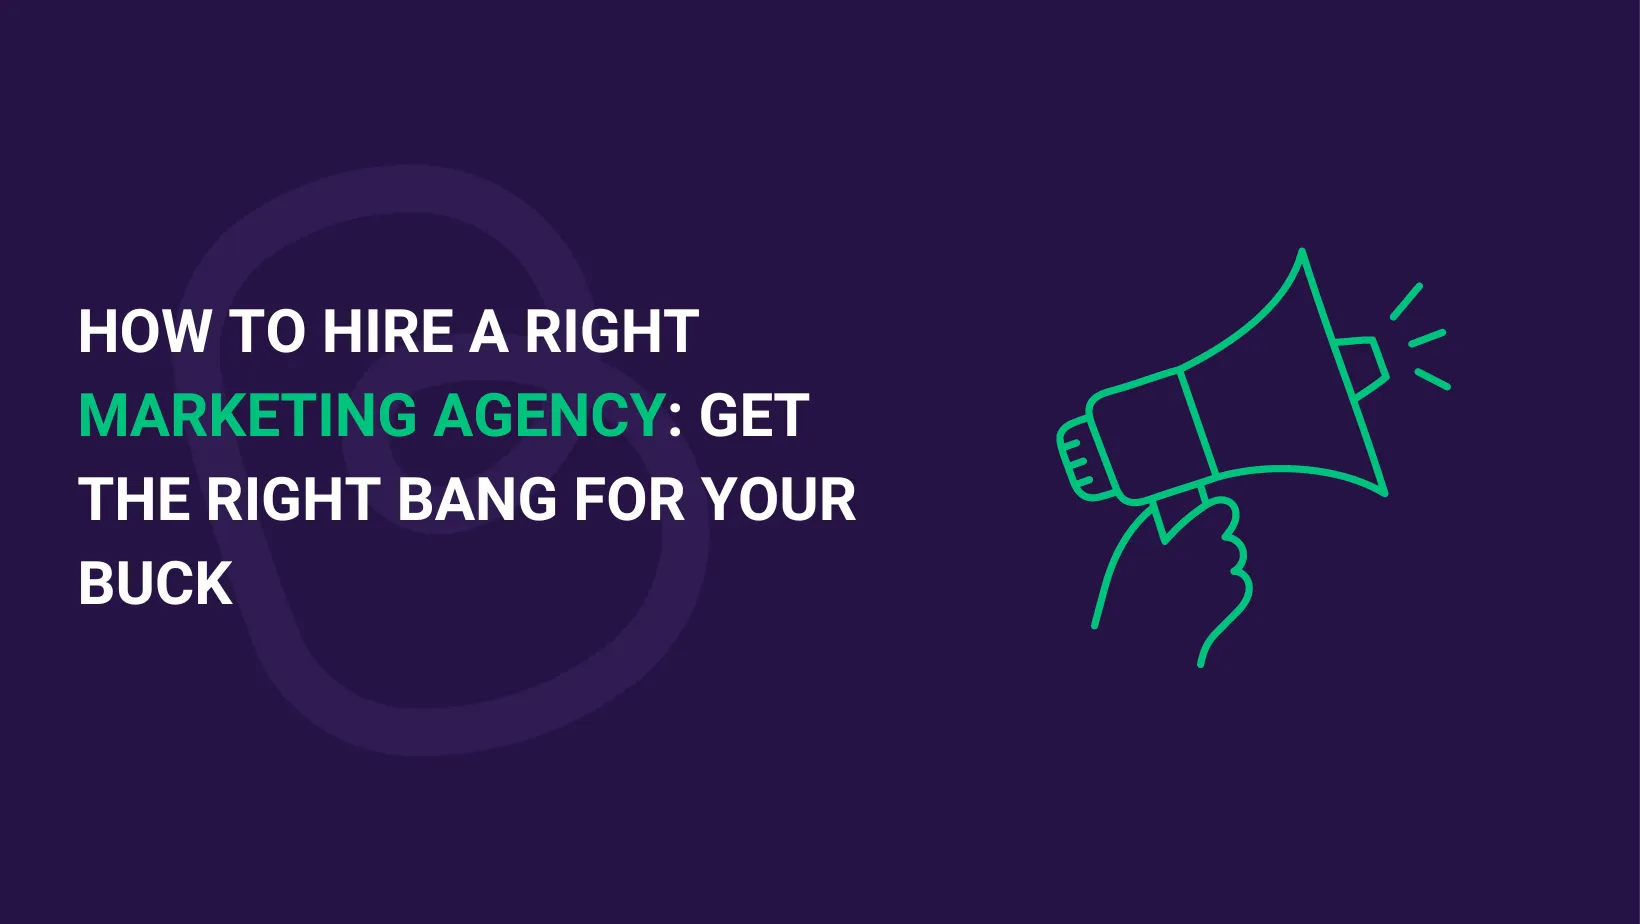 HOW TO HIRE A RIGHT MARKETING AGENCY: GET THE RIGHT BANG FOR YOUR BUCK